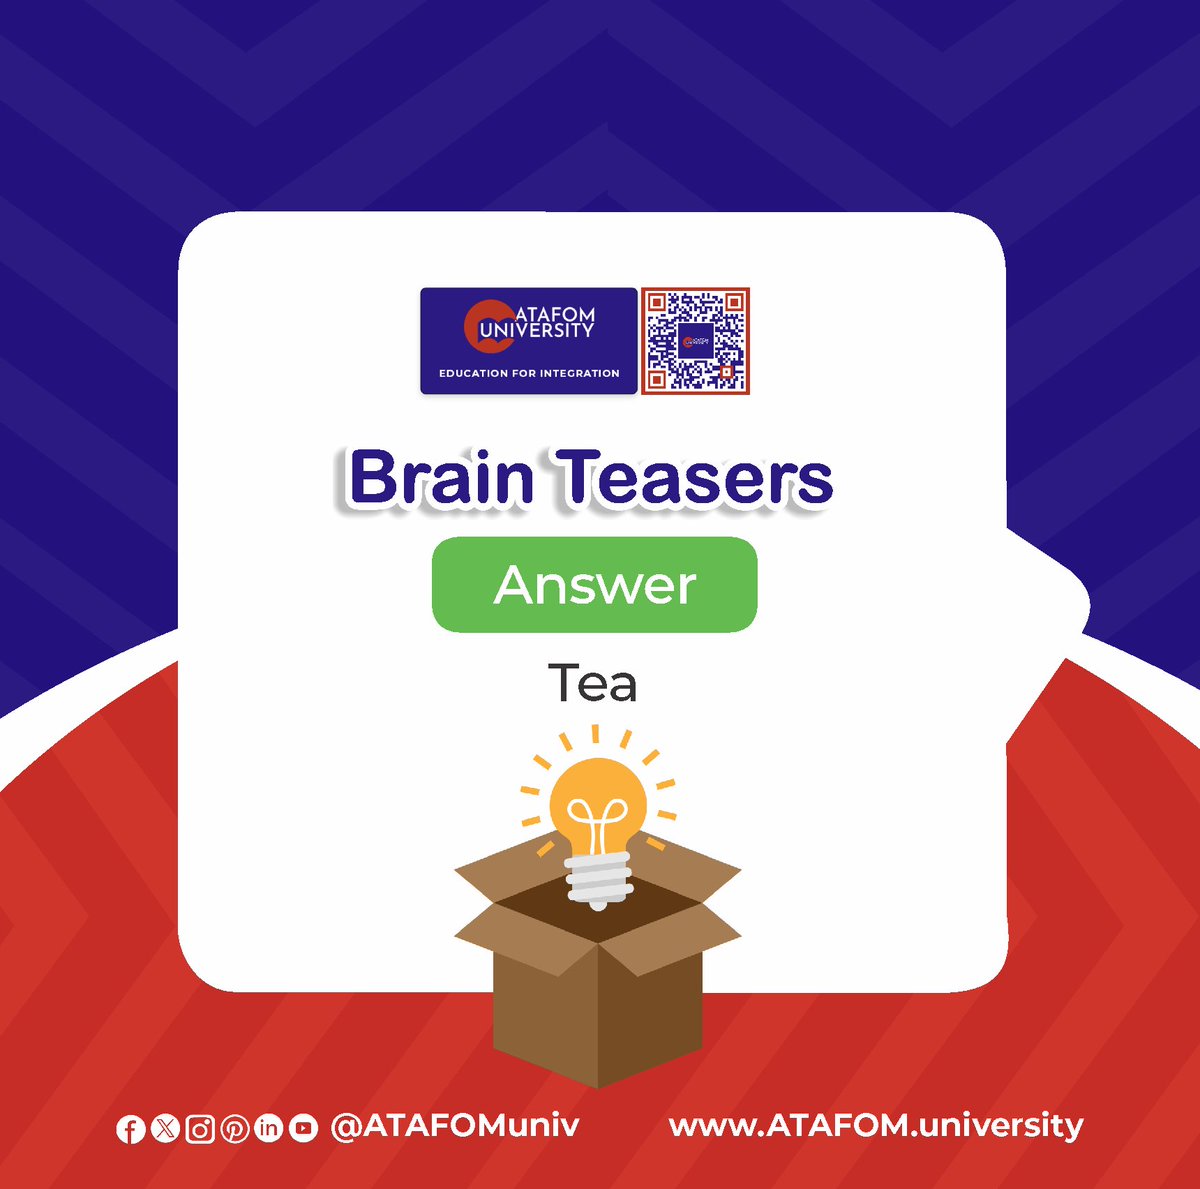 Exercise your mind with our latest brain teaser challenge!
Can you solve it? 
Test your wits and sharpen your cognitive skills with ATAFOM University. 

#BrainTeaser #MindChallenge #PuzzleFun #CriticalThinking #BrainGames #UniversityLife #ATAFOMonlinecampus #Learning #Education…